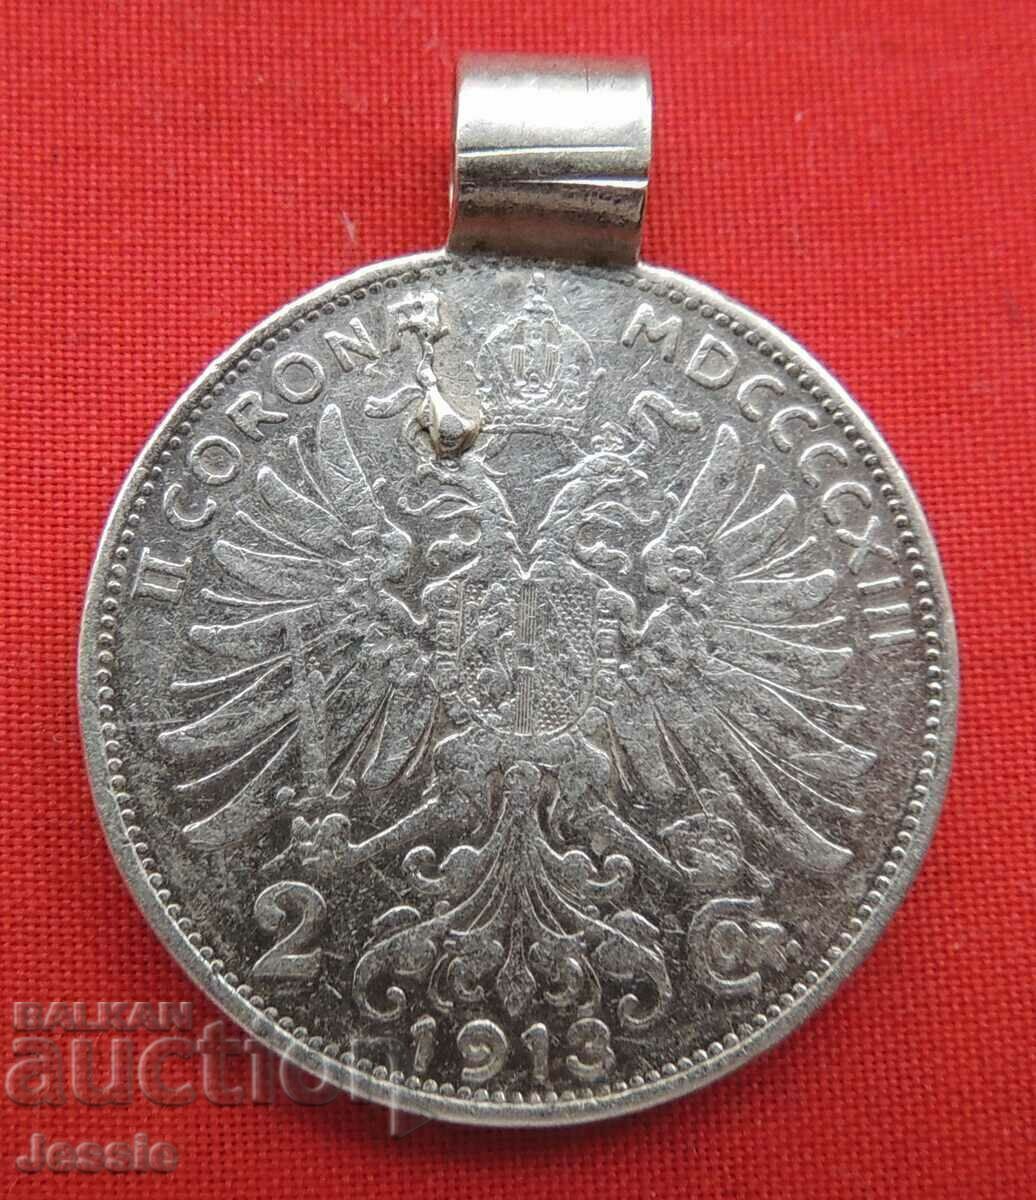 2 crowns 1913 Austria-Hungary silver with bearer